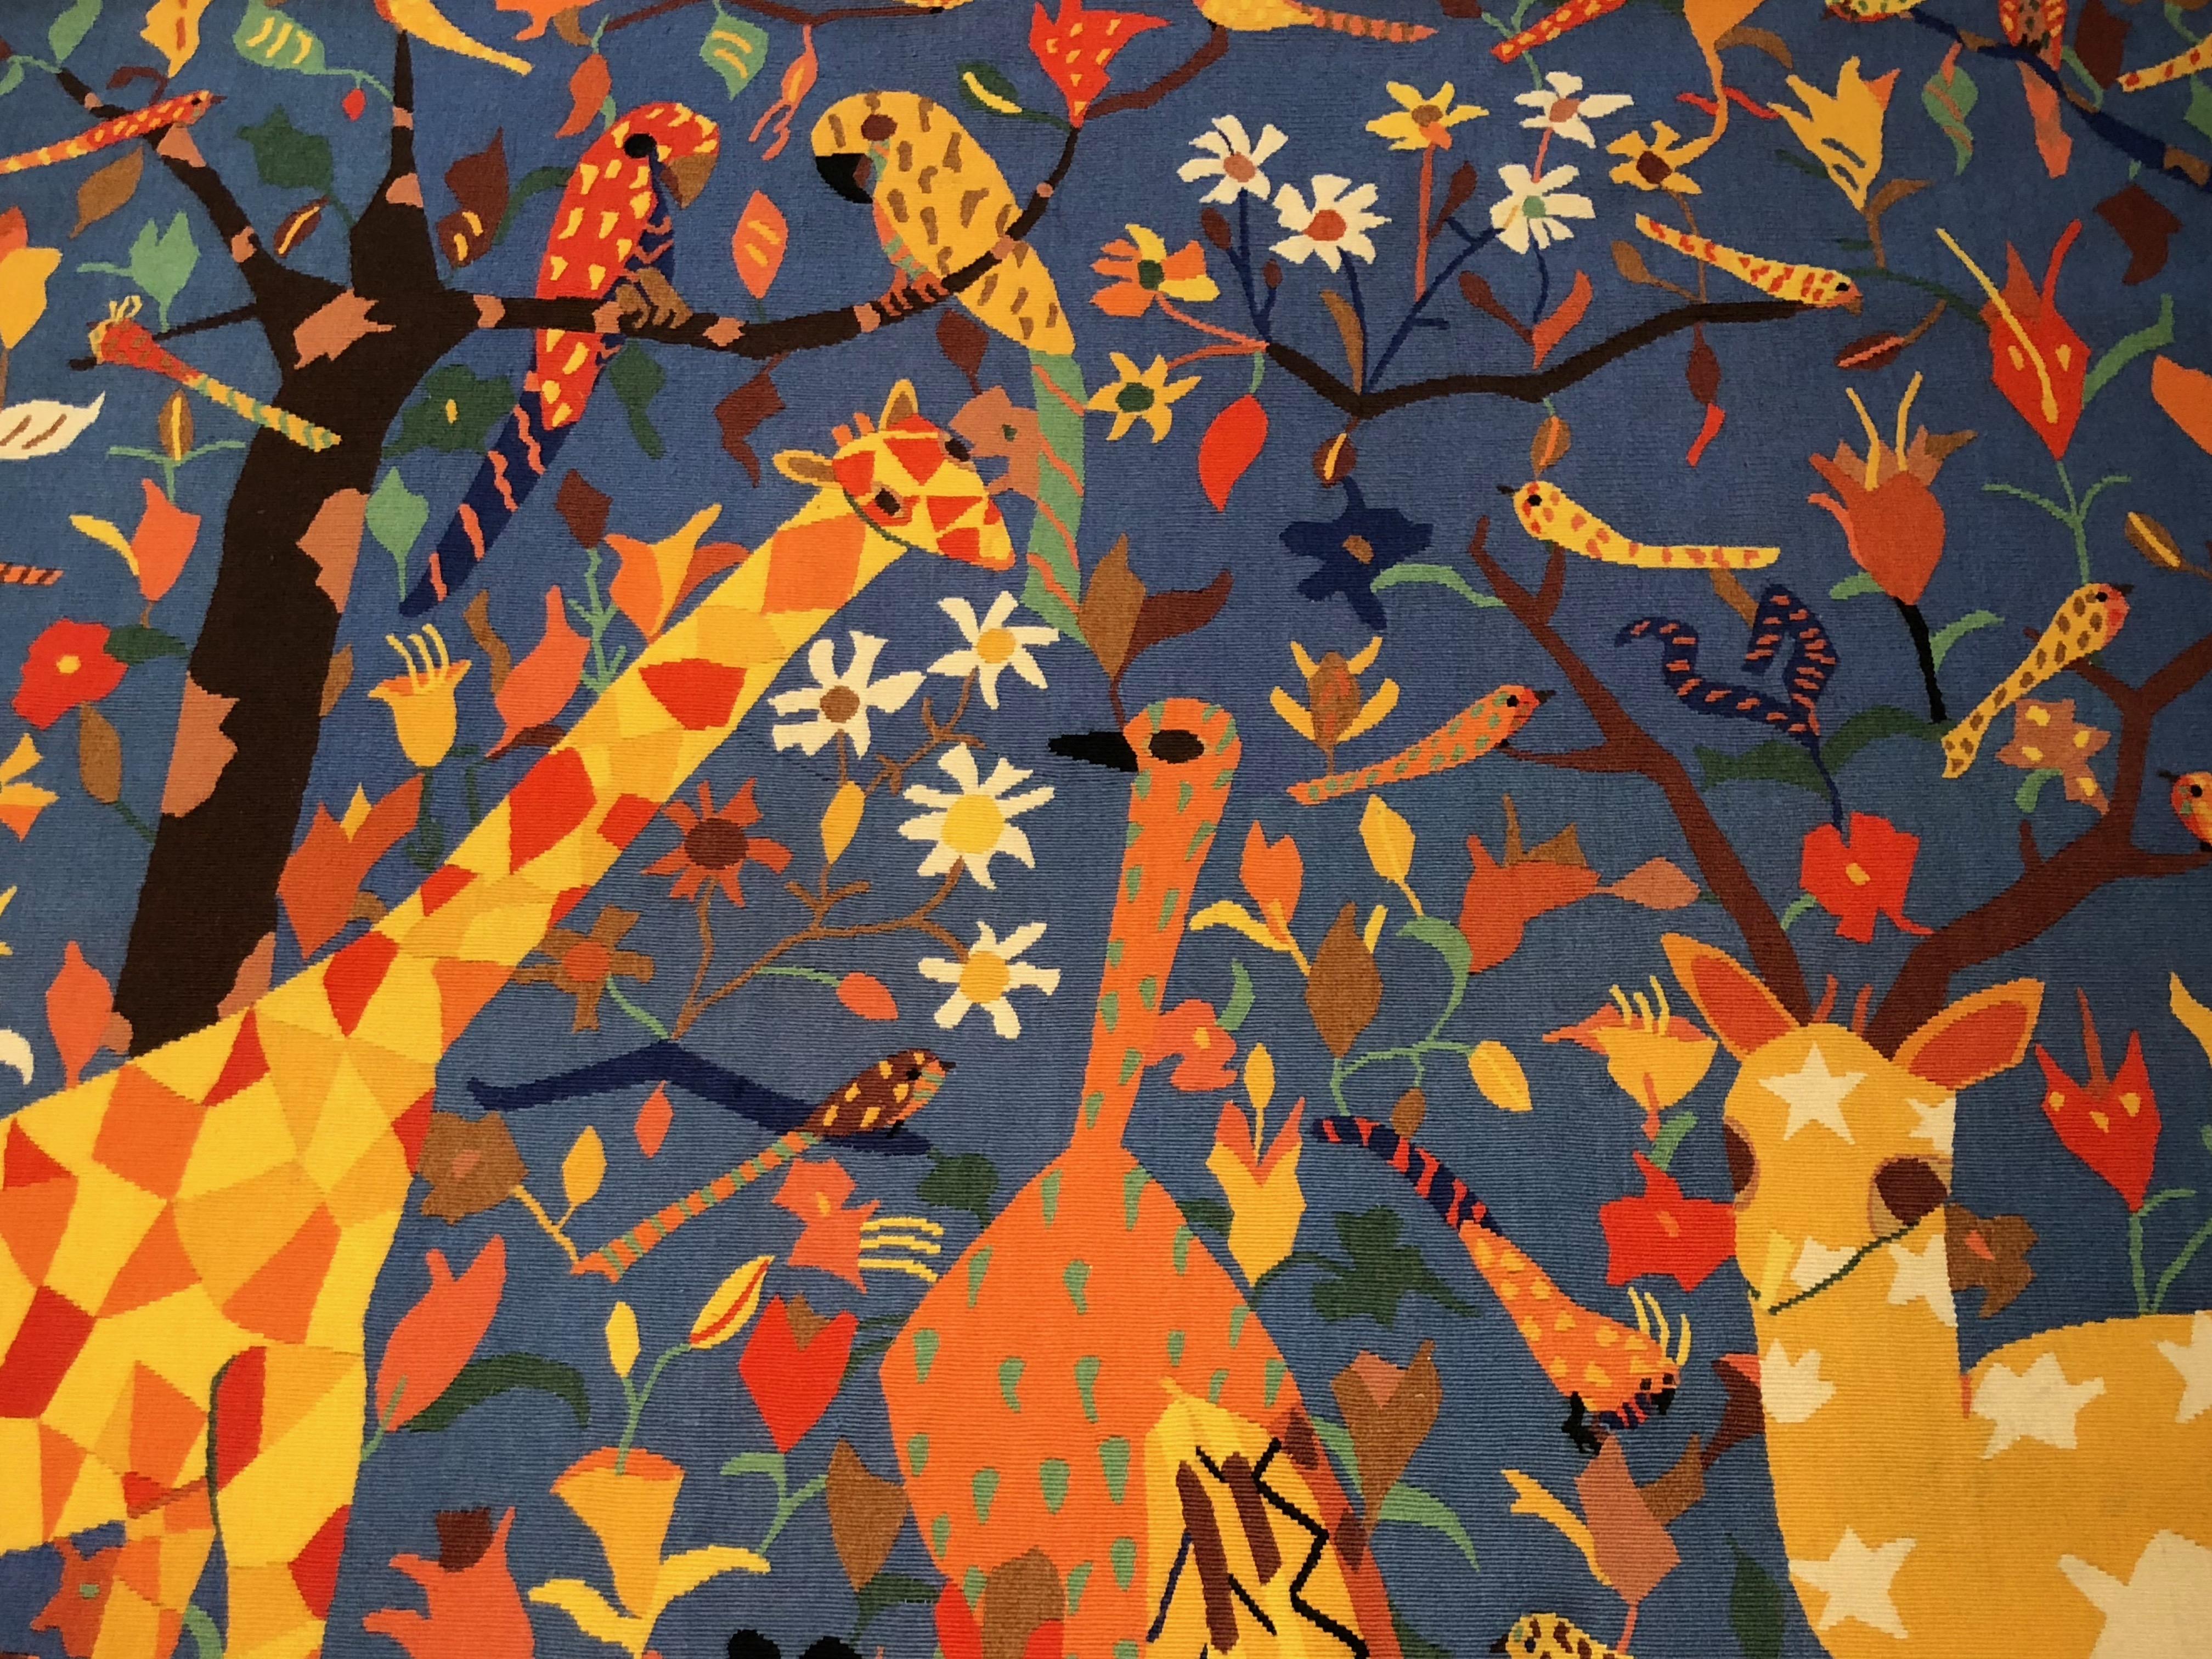 Charming Mid-Century tapestry designed by Maurice Ferreol (1906-1969) and woven at Atelier Legouiex in Aubusson, France. Woven in wool, it dates to 1953 and titled 